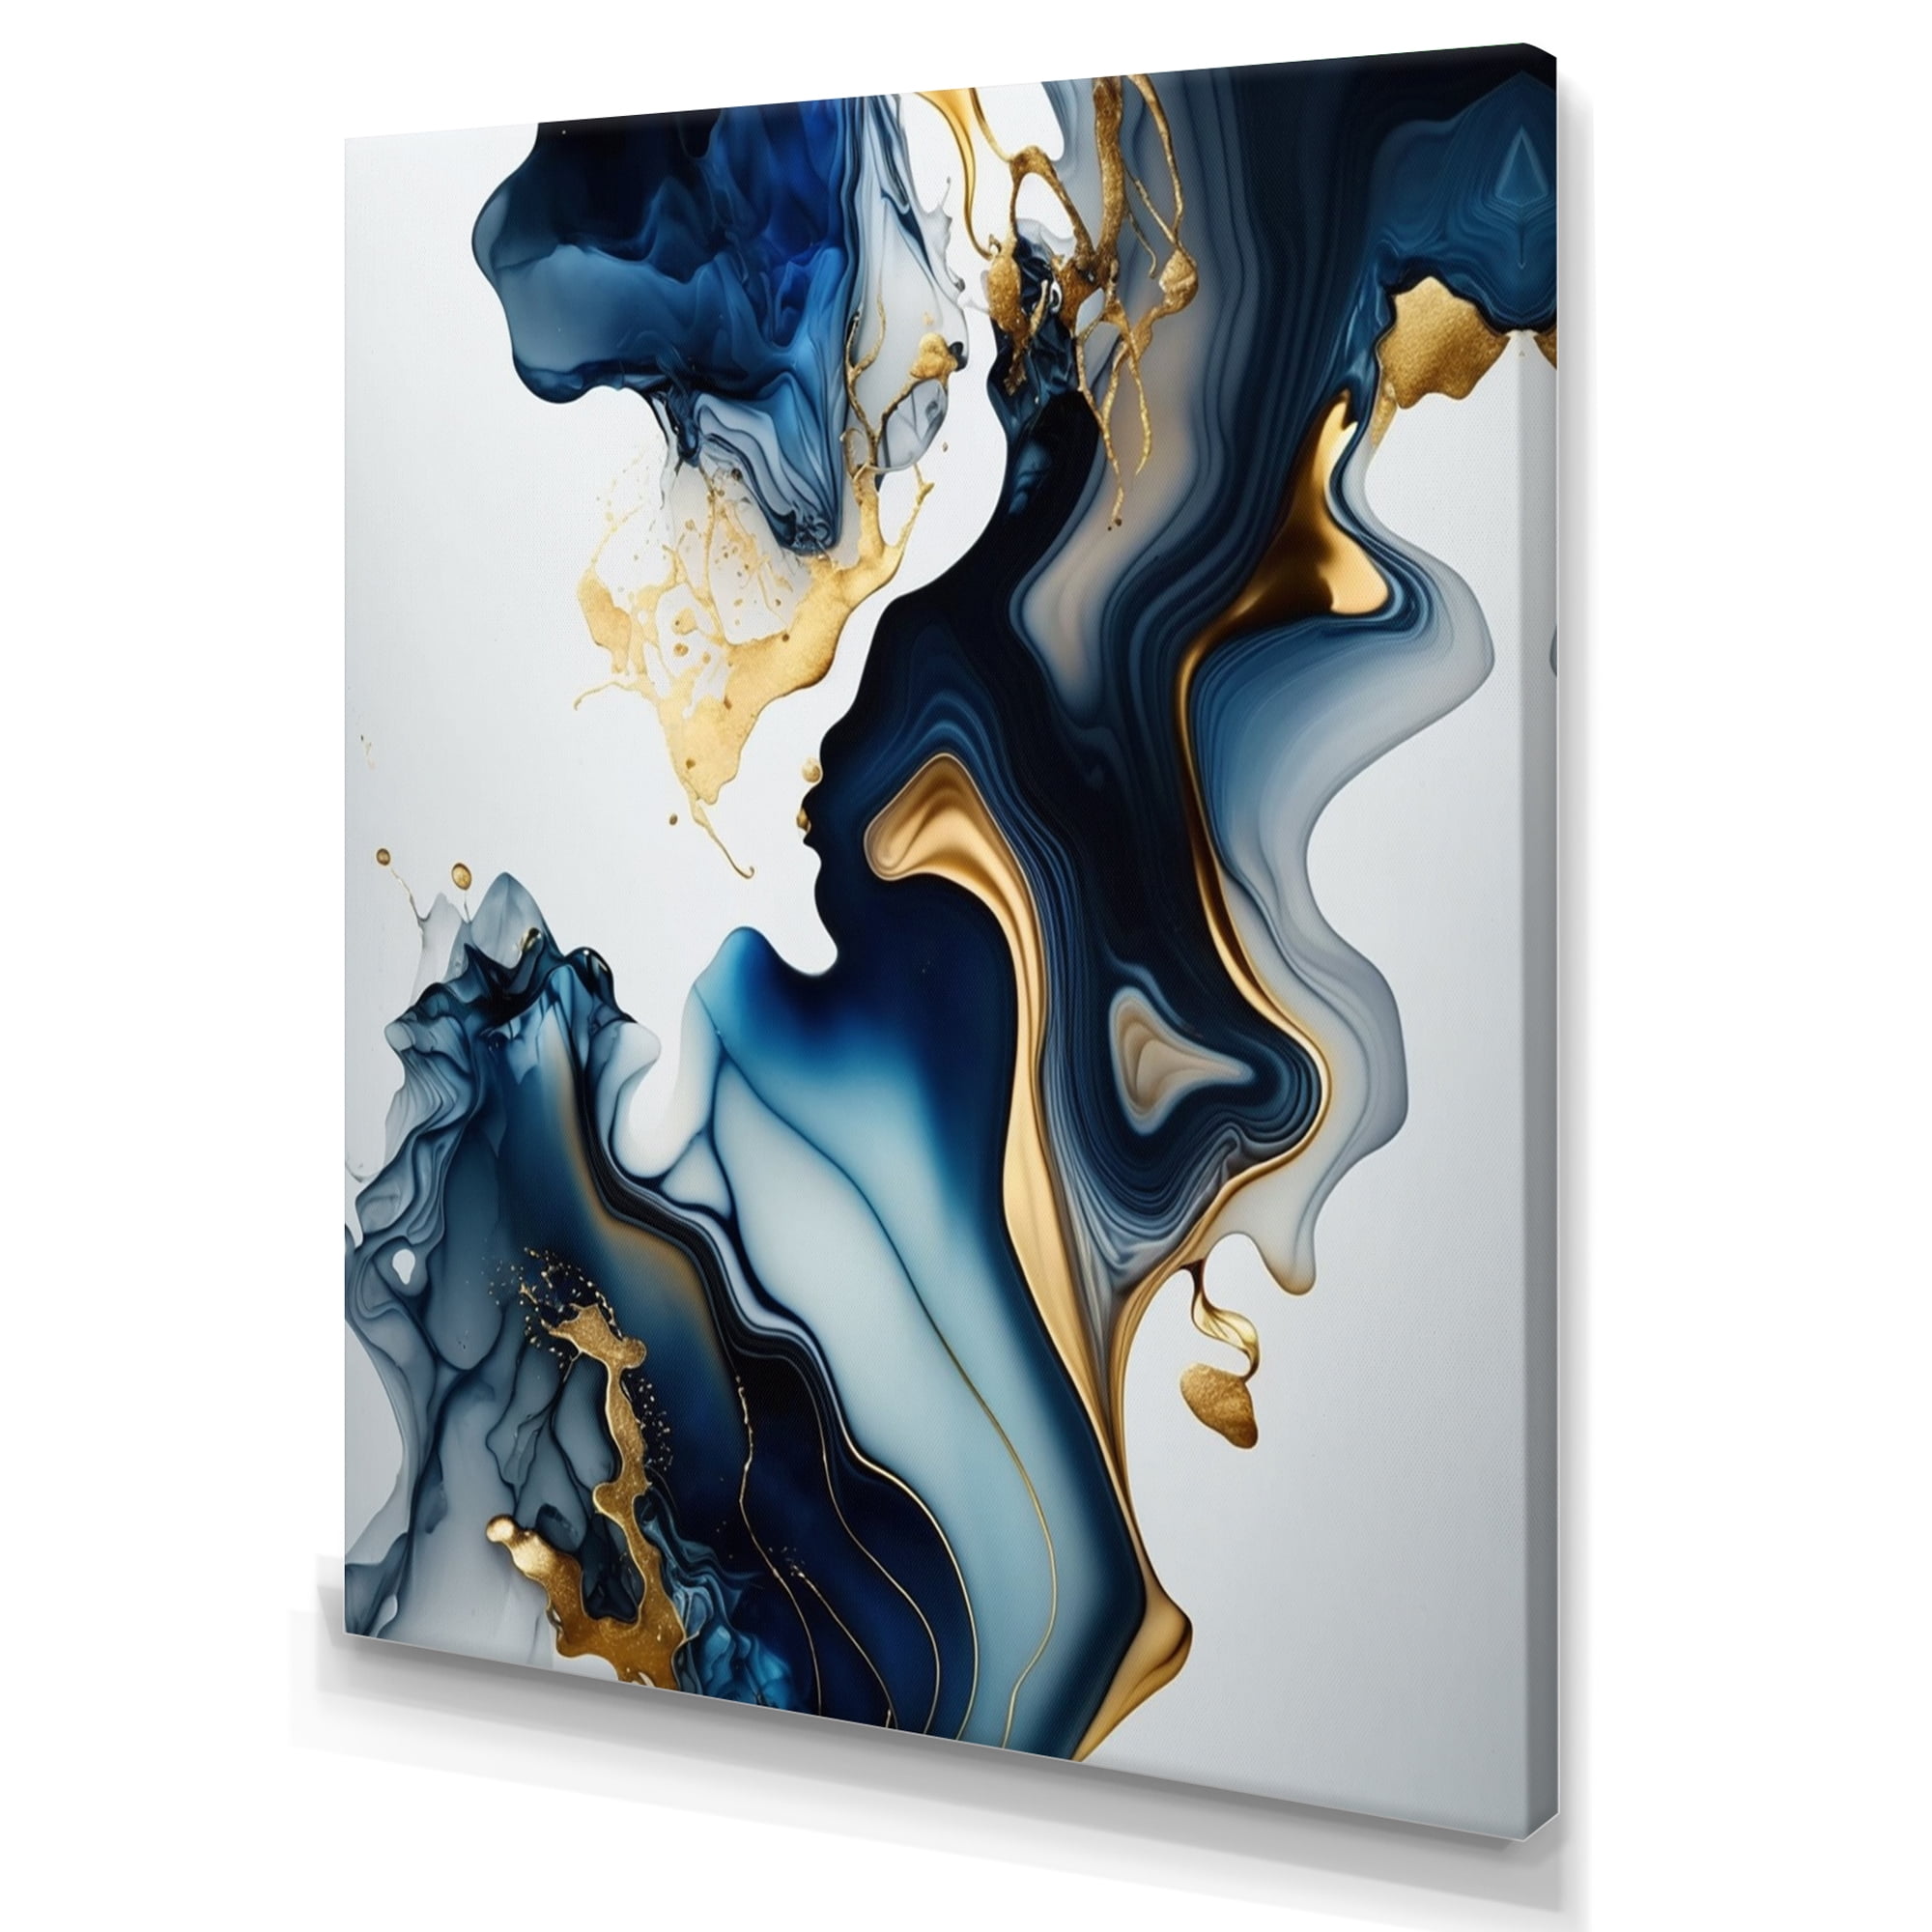  Large Print Wall Art on Canvas, Modern Marble Wall Art Print,  Abstract Canvas Wall Decor, 1 PANEL (24x16): Posters & Prints